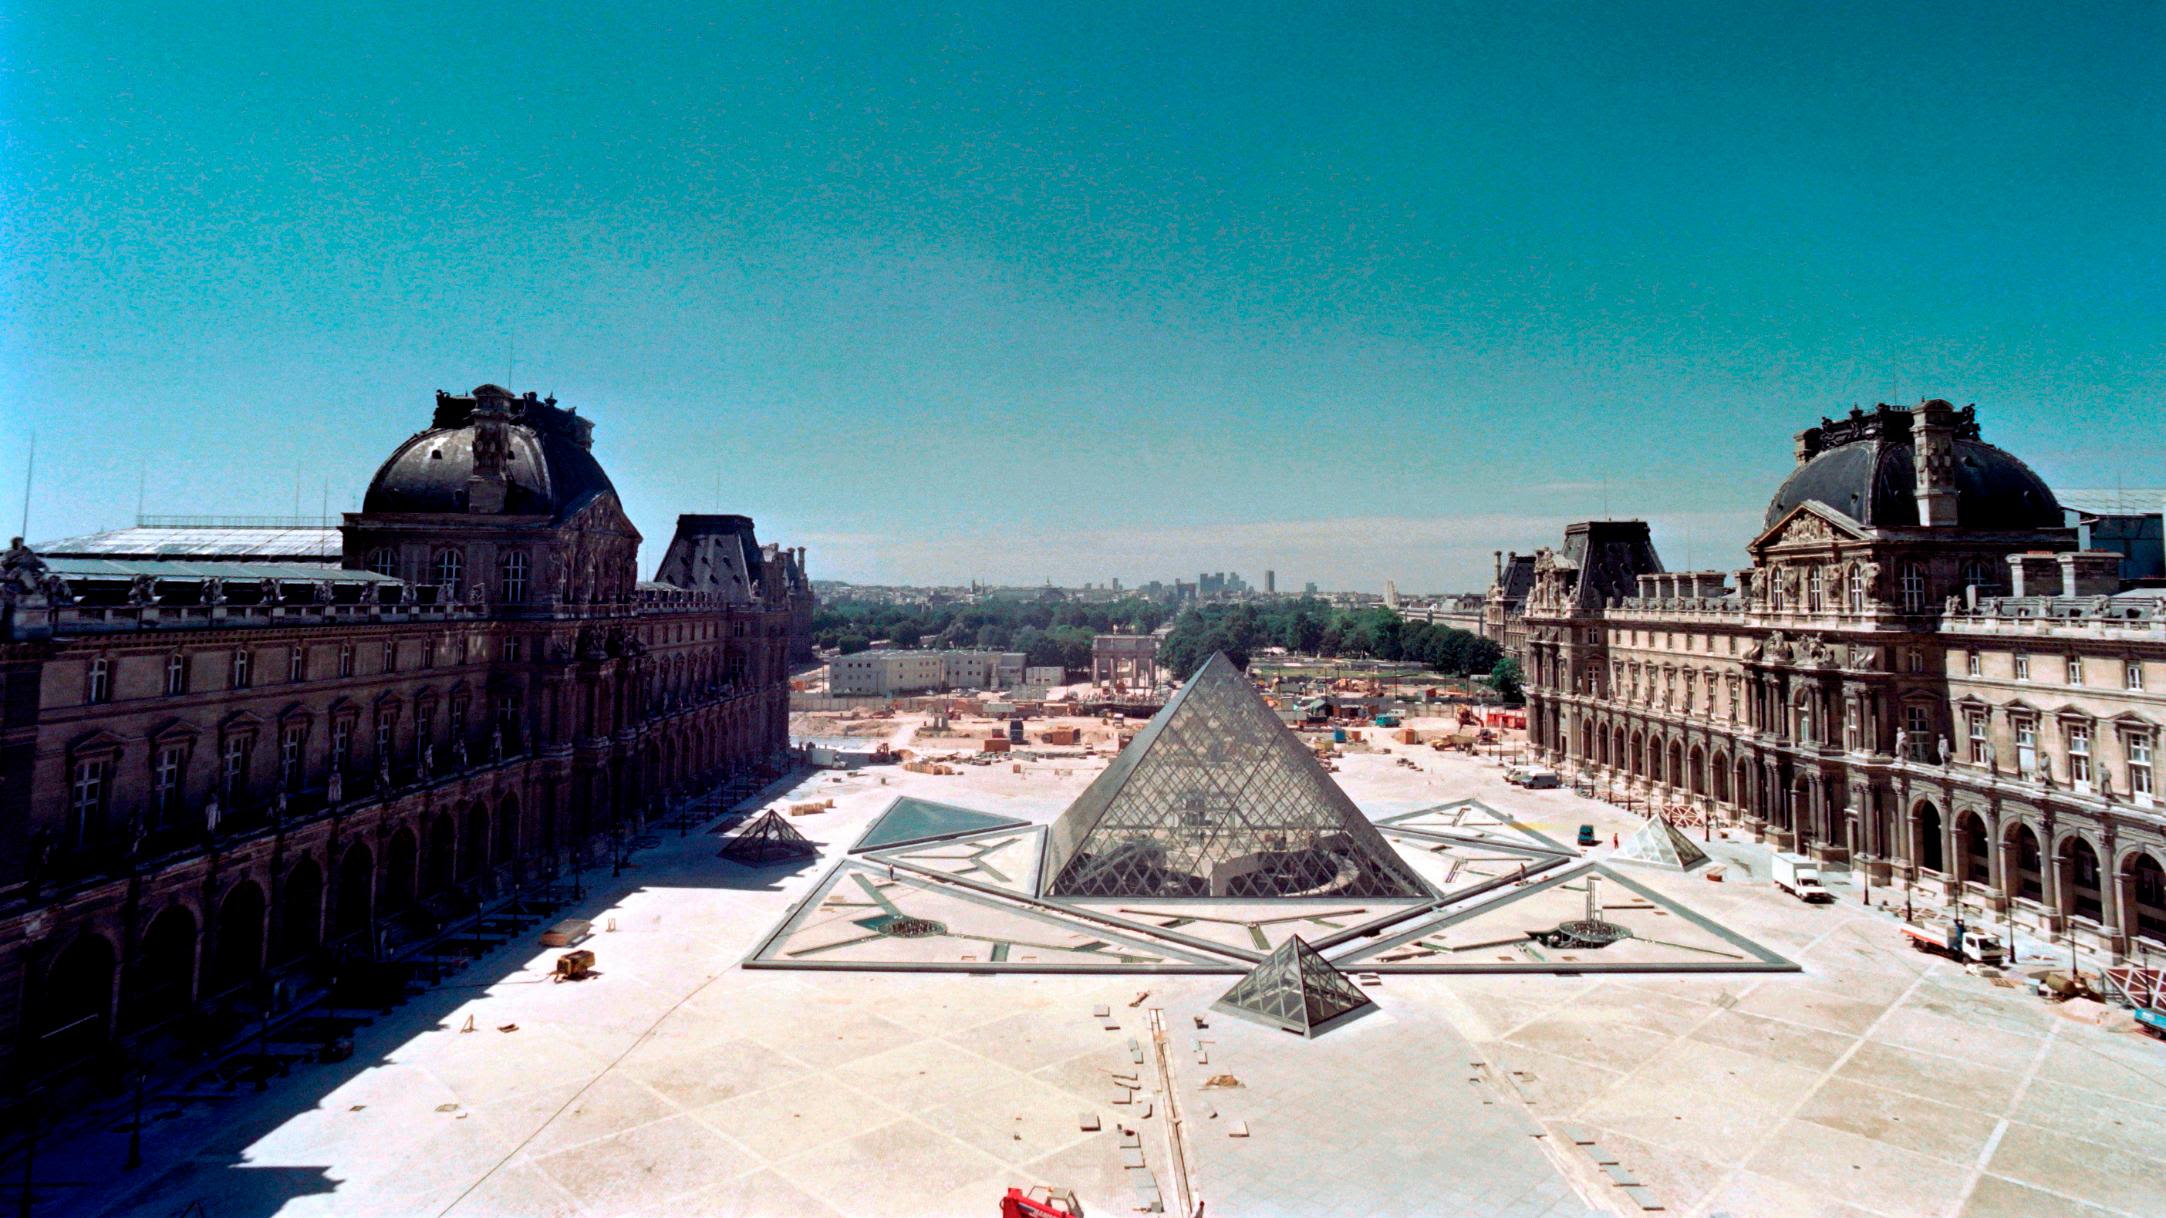 IM Pei: Architect Of Time, Place And Purpose